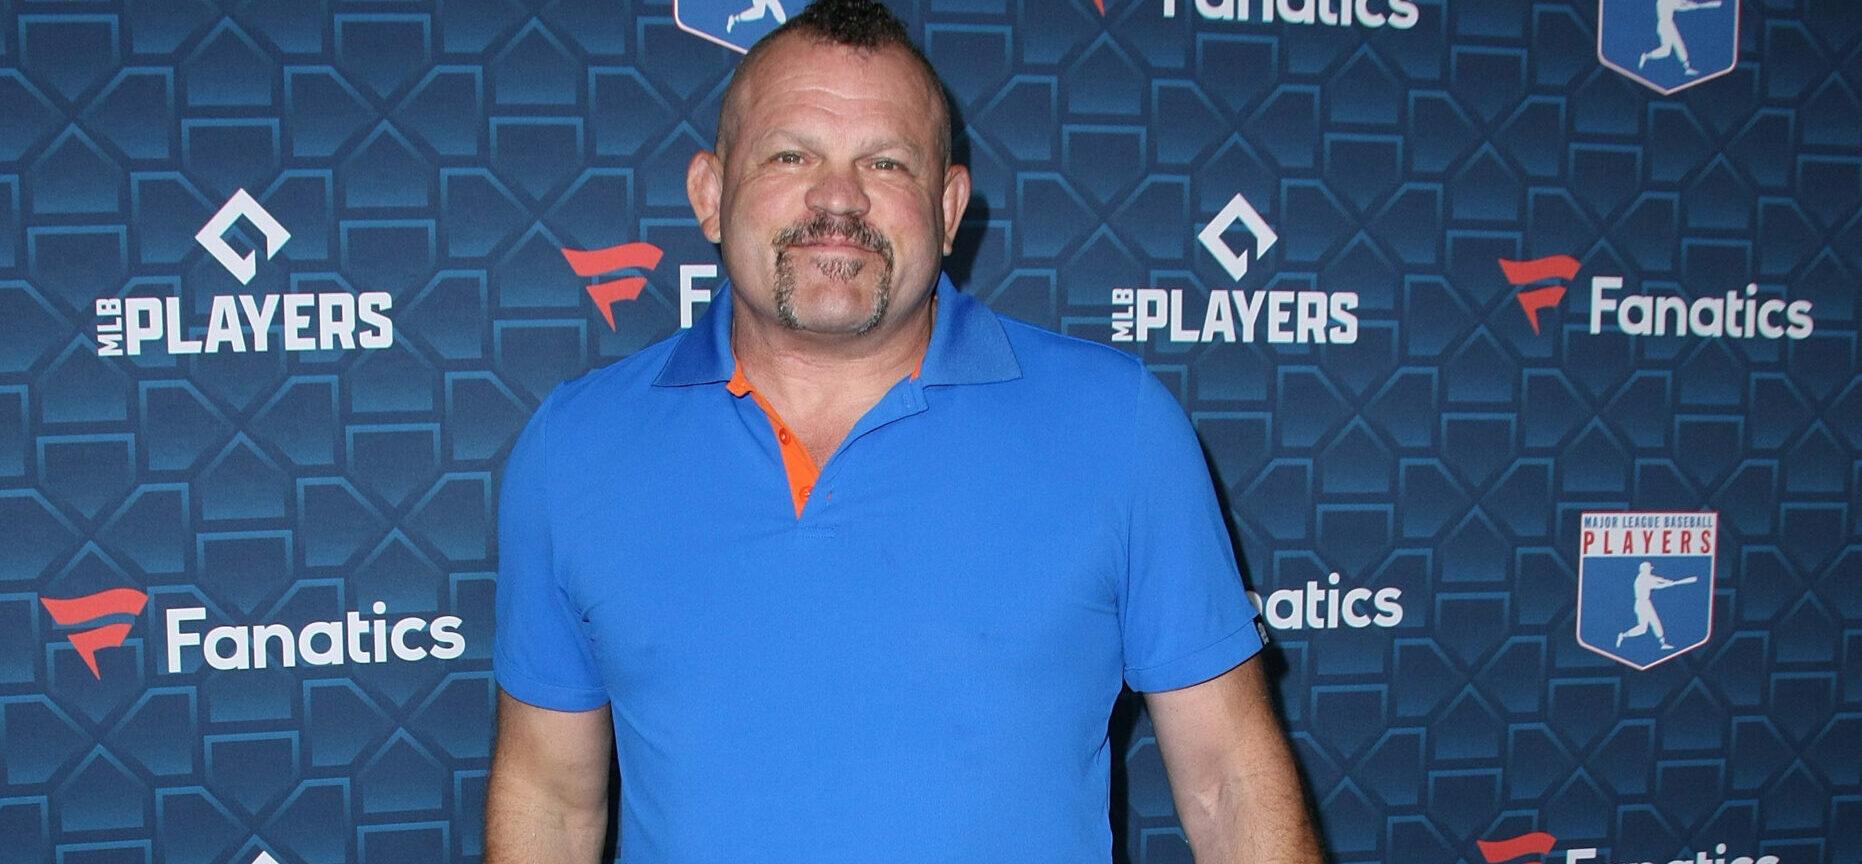 ‘UFC’ Star Chuck Liddell’s Ex-Wife Claims He Is Suffering From ‘Traumatic Brain Injury’